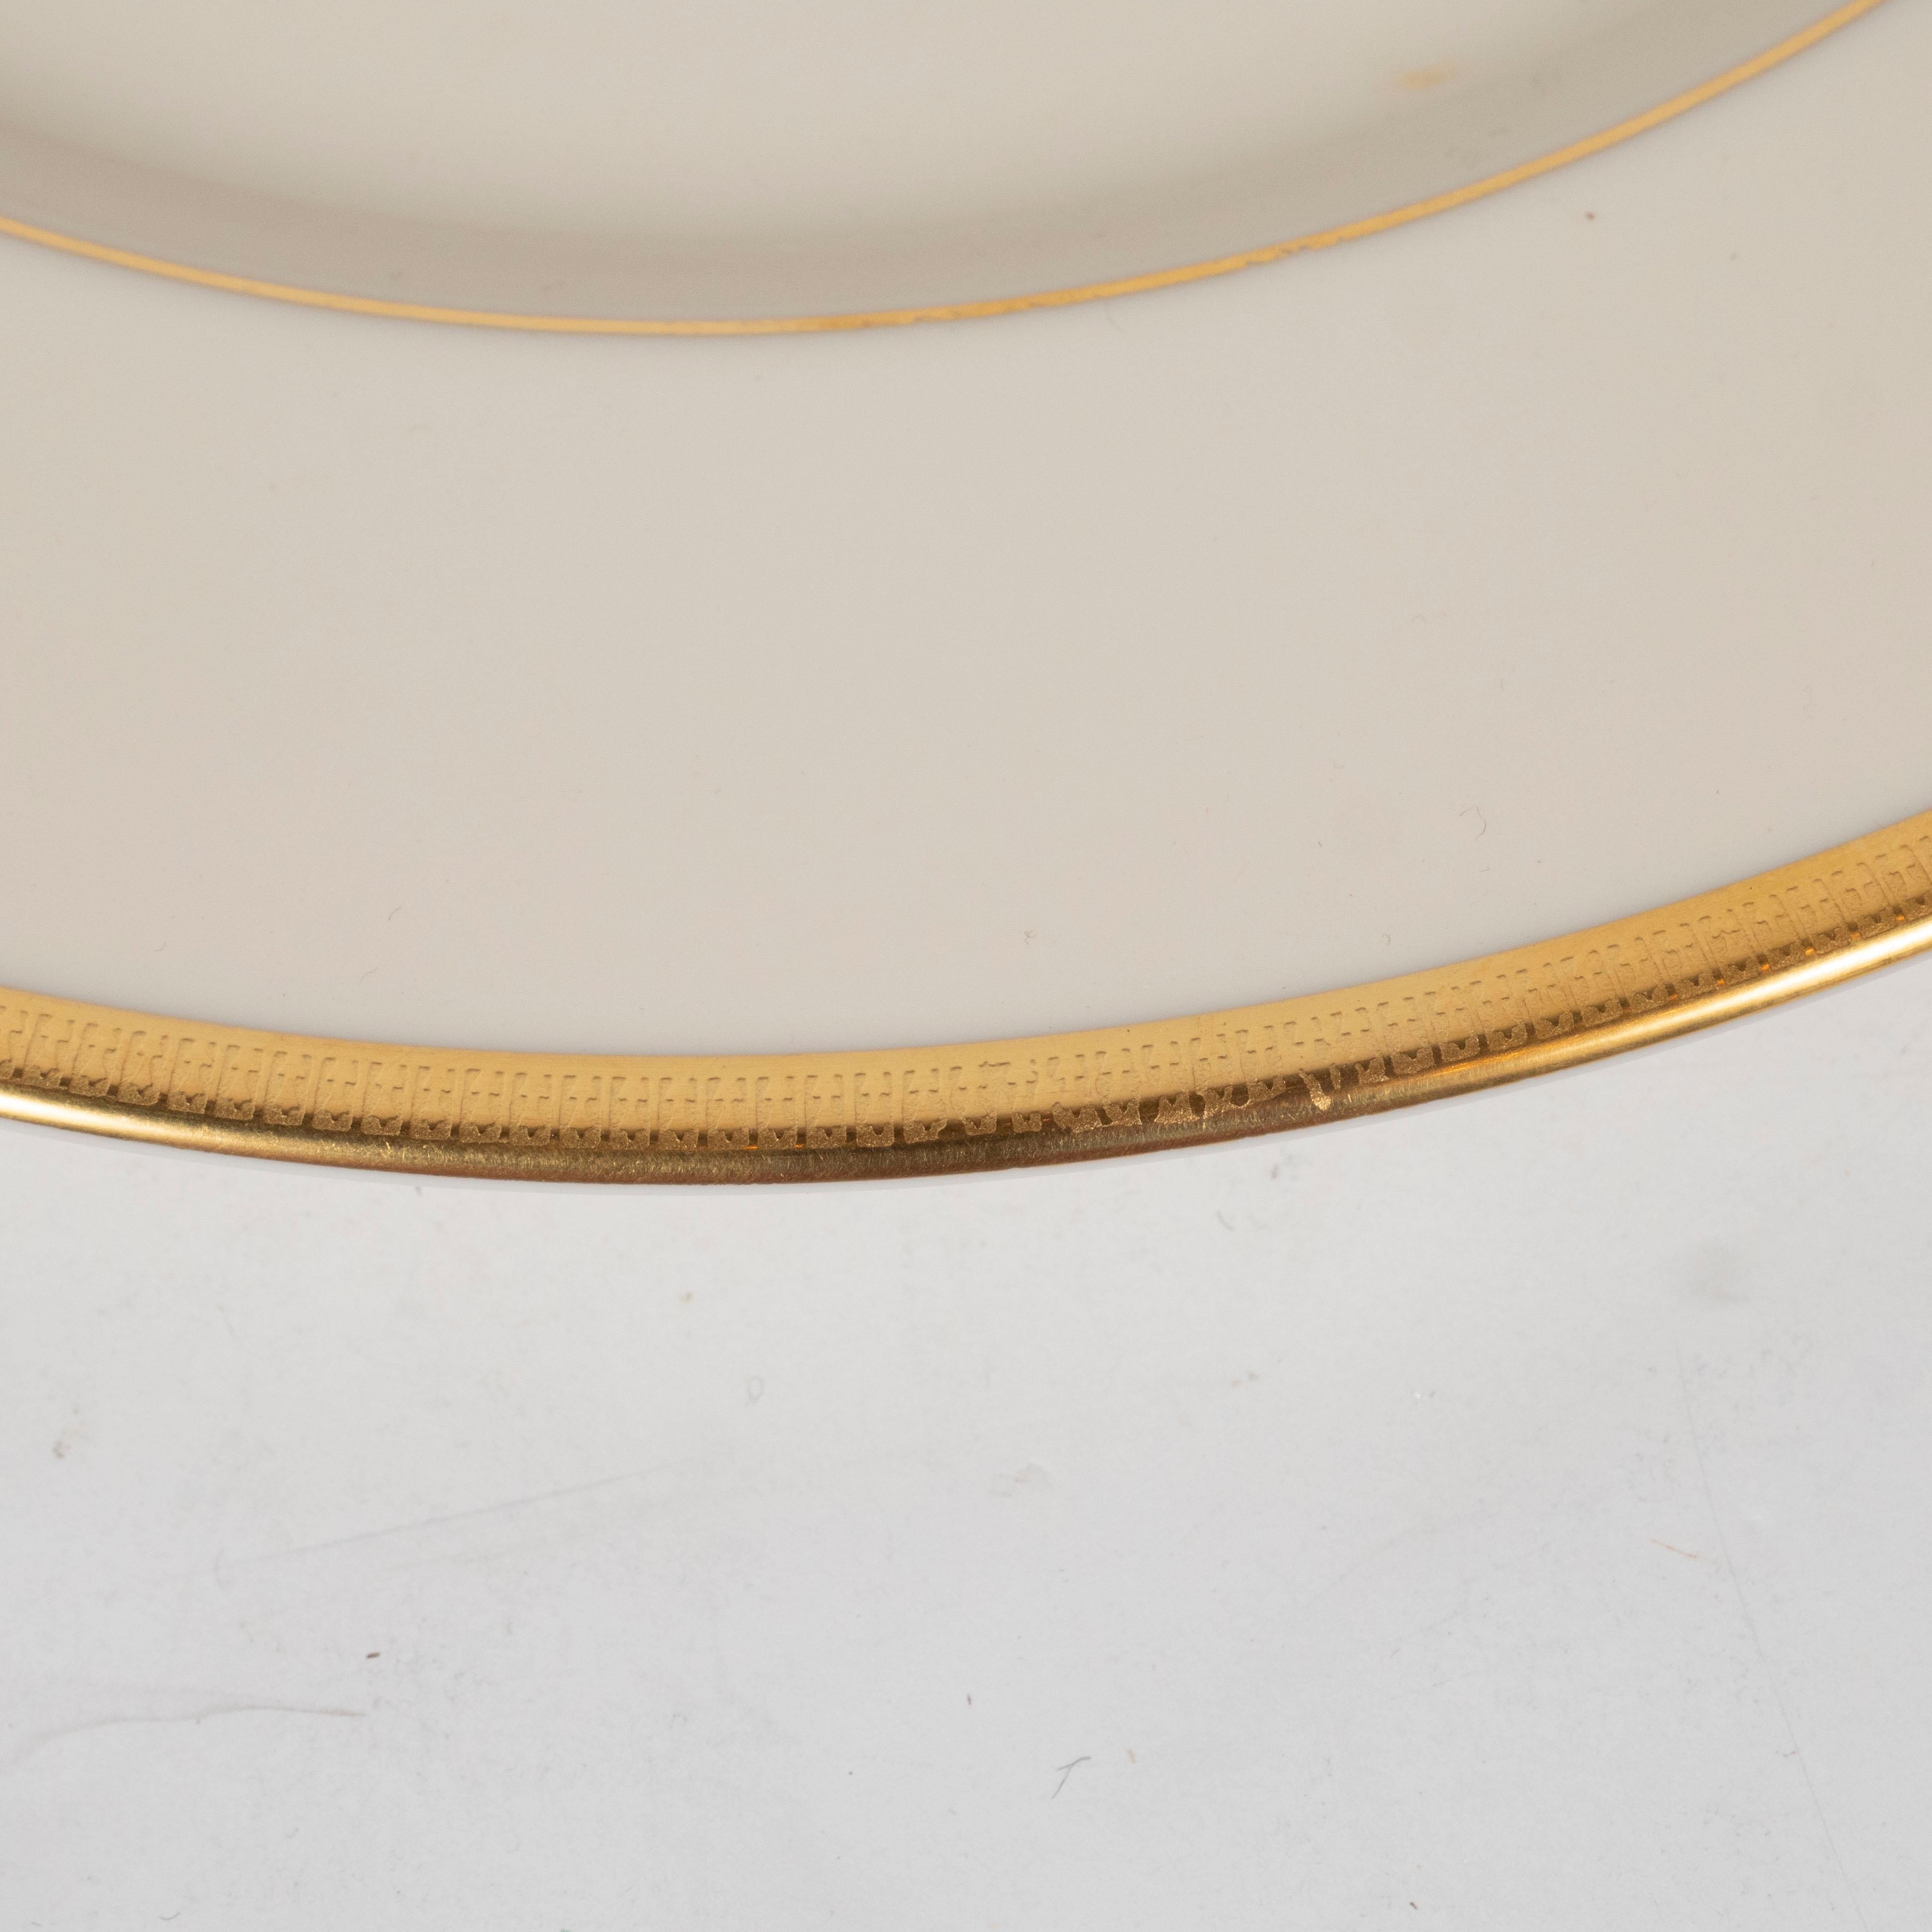 Set of 12 Modernist Dinner Plates in 24-Karat Gold and Bone China by Lenox 1